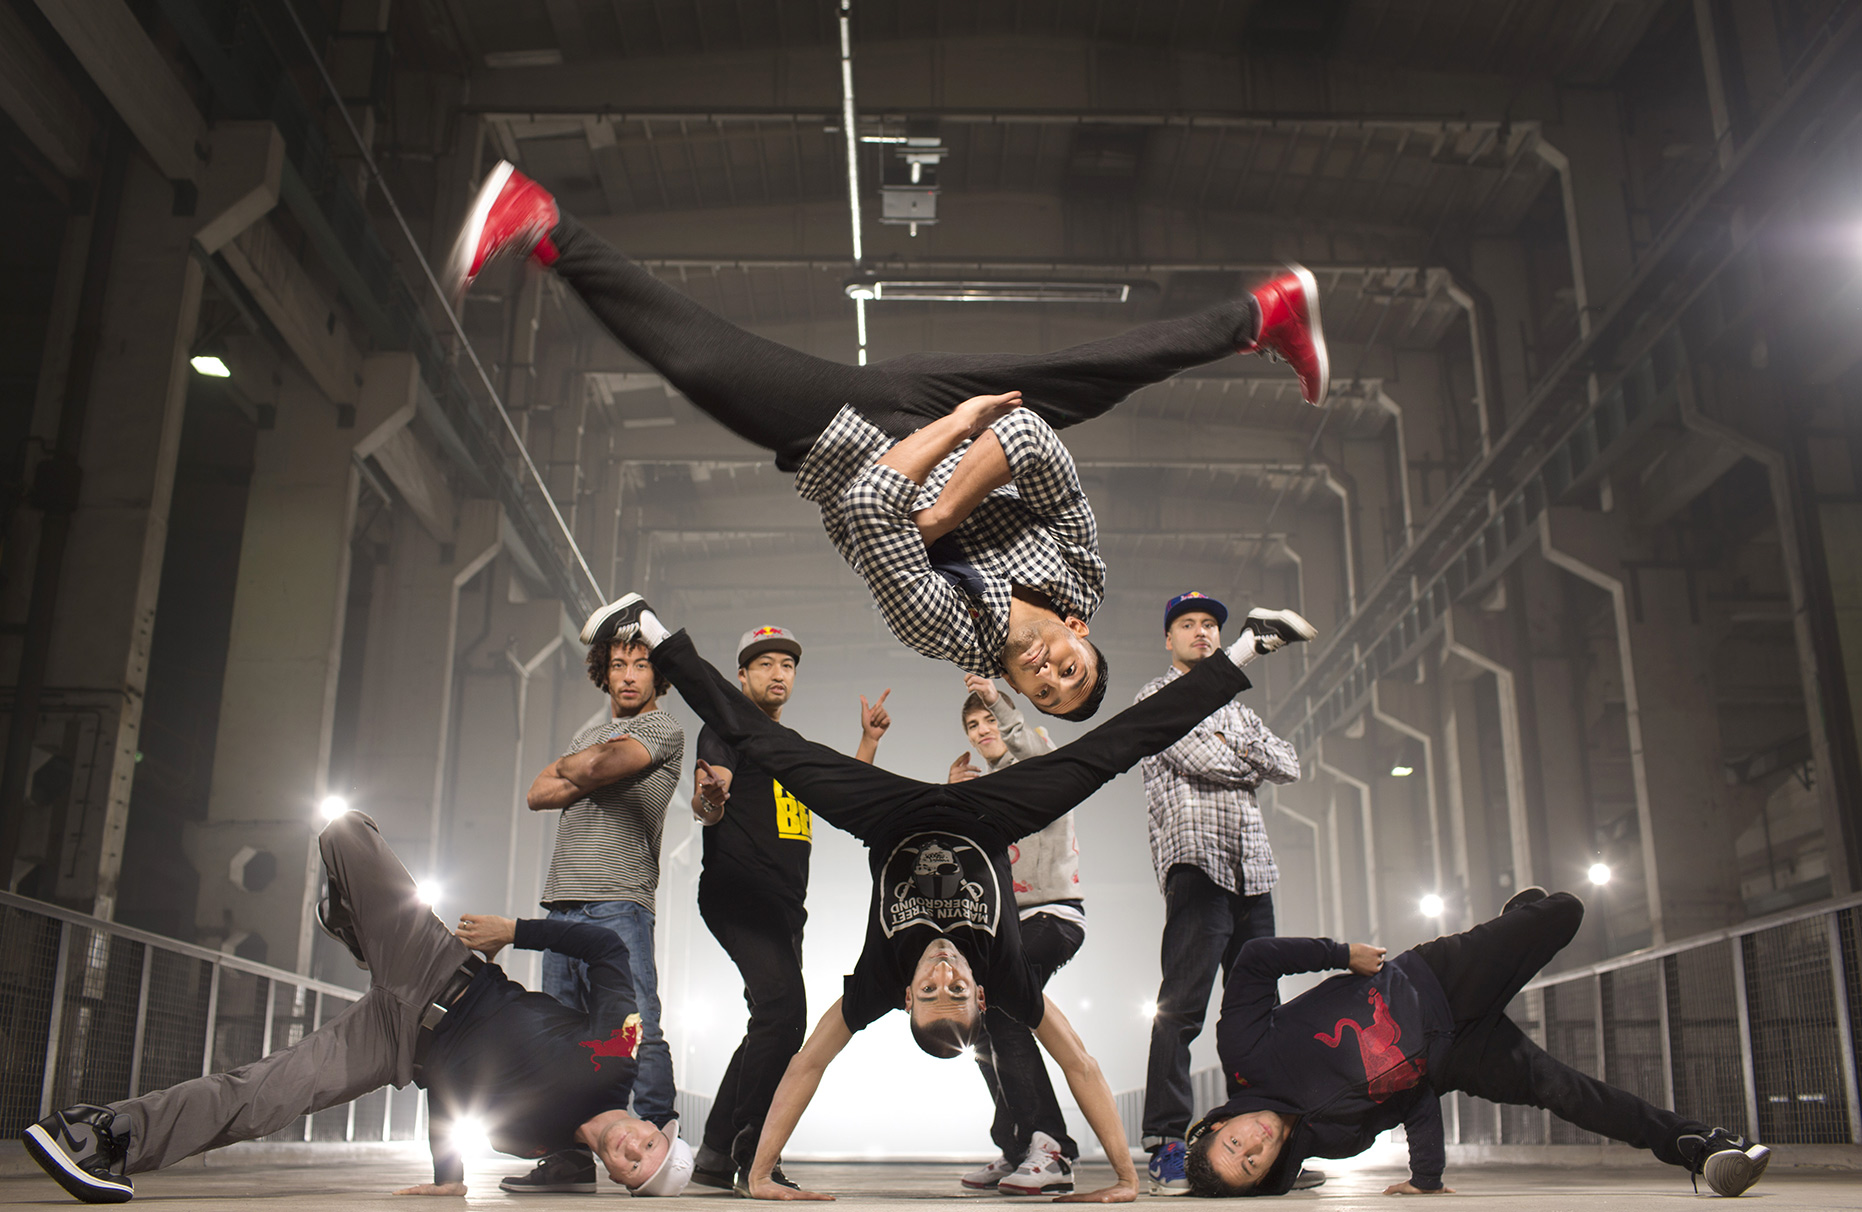 © Dirk Mathesius, Benny & Gengis from Flying Steps Crew, during Flying Illusion Tour, client Red Bull, Berlin